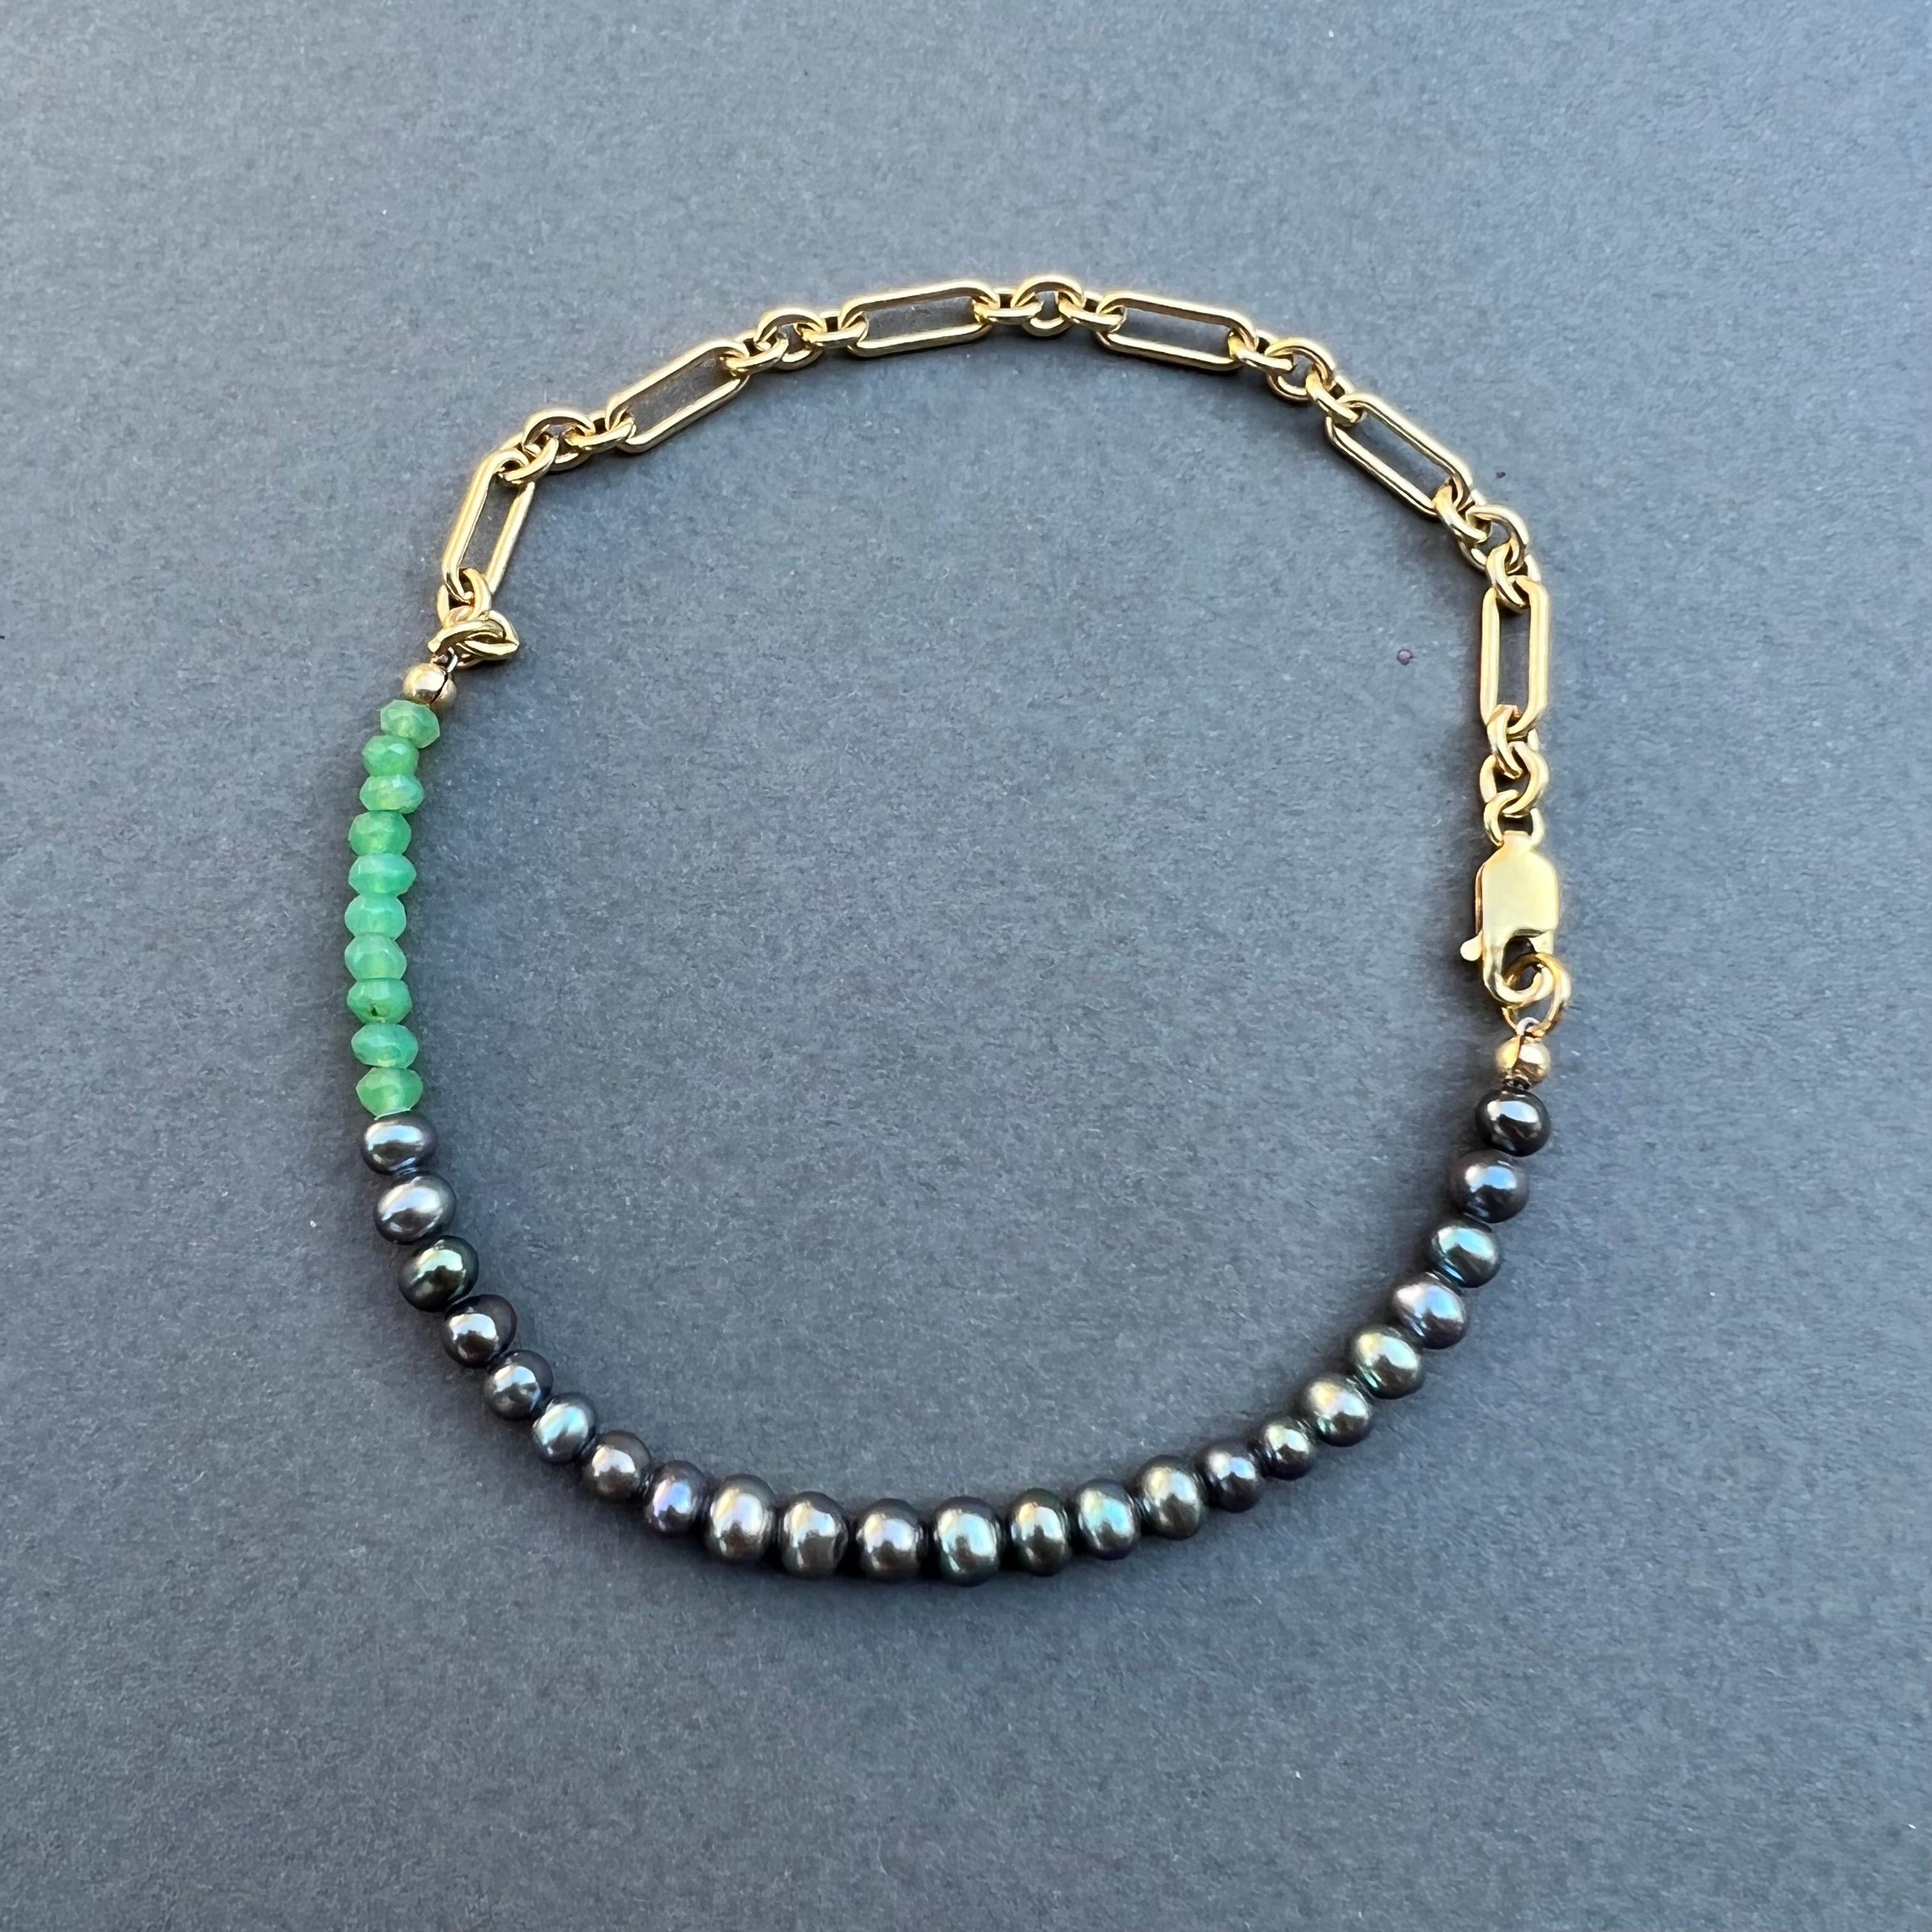 Black Pearl Ankle Bracelet Gold Filled Chain Chrysoprase J Dauphin For Sale 3